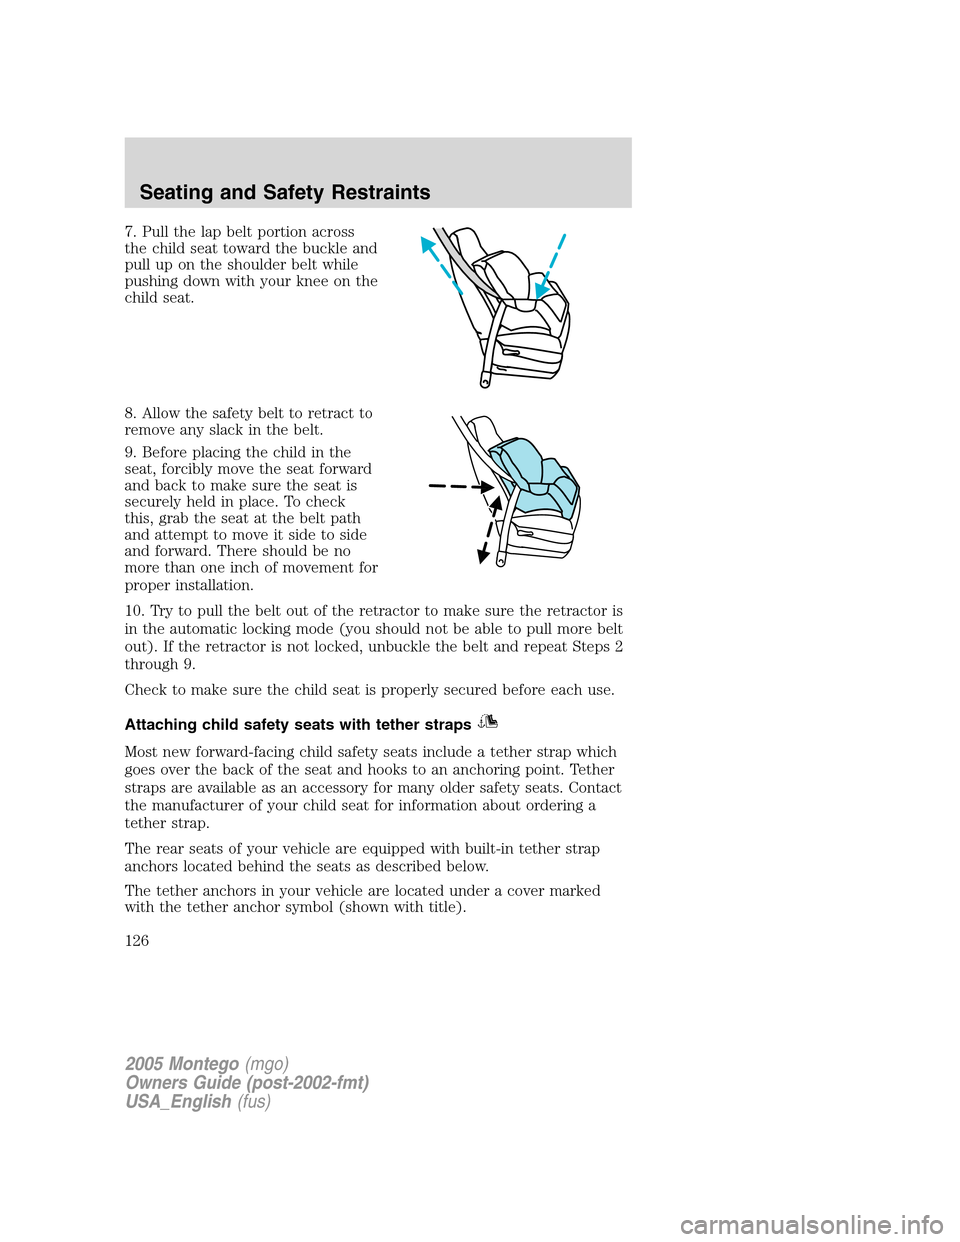 Mercury Montego 2005  Owners Manuals 7. Pull the lap belt portion across
the child seat toward the buckle and
pull up on the shoulder belt while
pushing down with your knee on the
child seat.
8. Allow the safety belt to retract to
remove